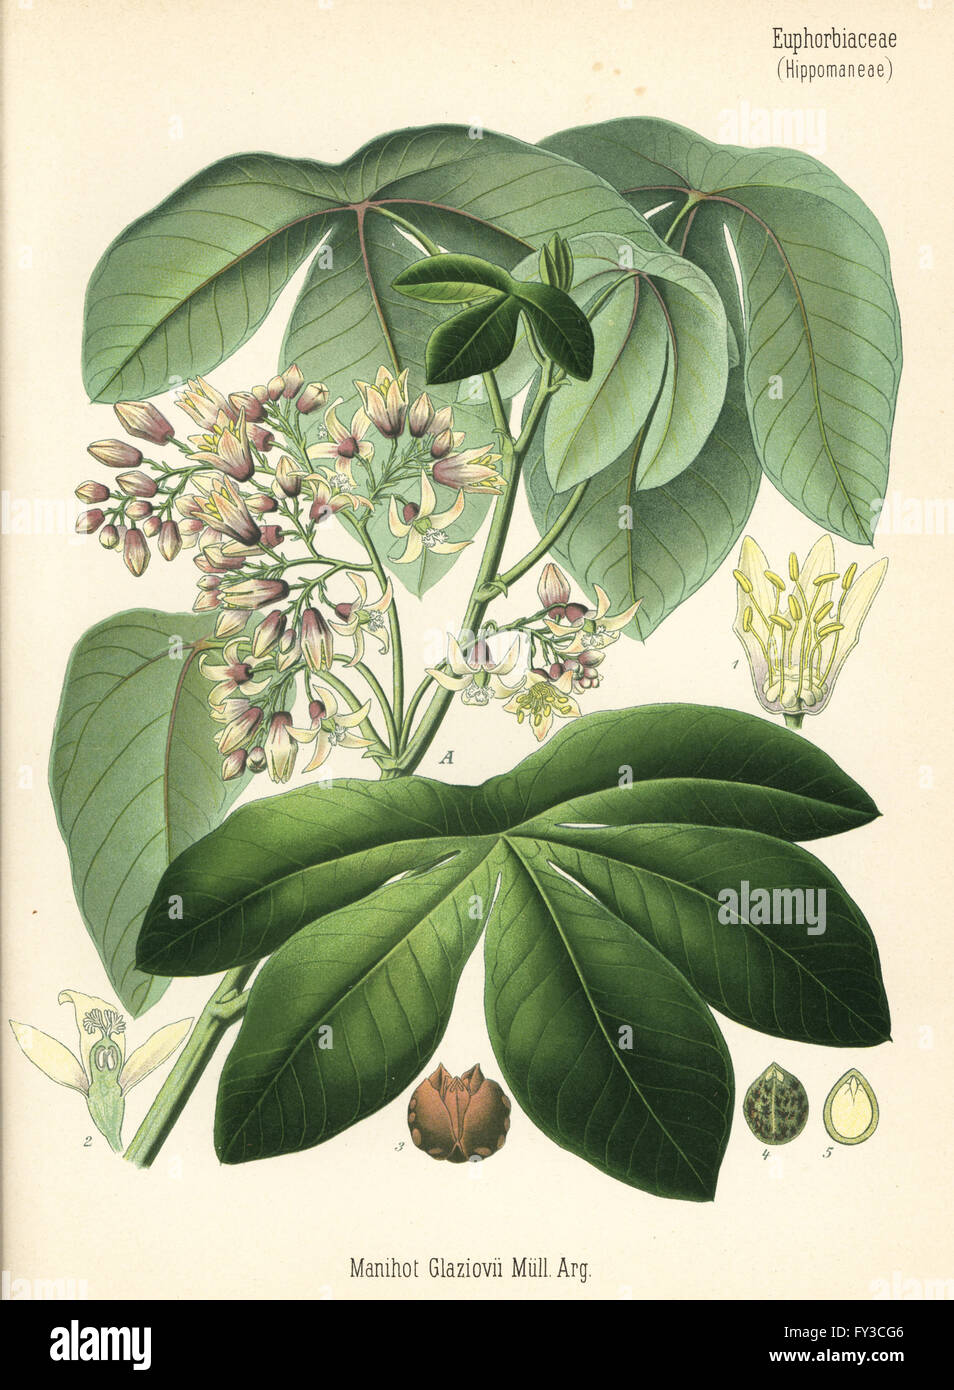 Tree cassava or ceara rubber tree, Manihot carthaginensis subsp. glaziovii (Manihot glaziovii). Chromolithograph after a botanical illustration from Hermann Adolph Koehler's Medicinal Plants, edited by Gustav Pabst, Koehler, Germany, 1887. Stock Photo